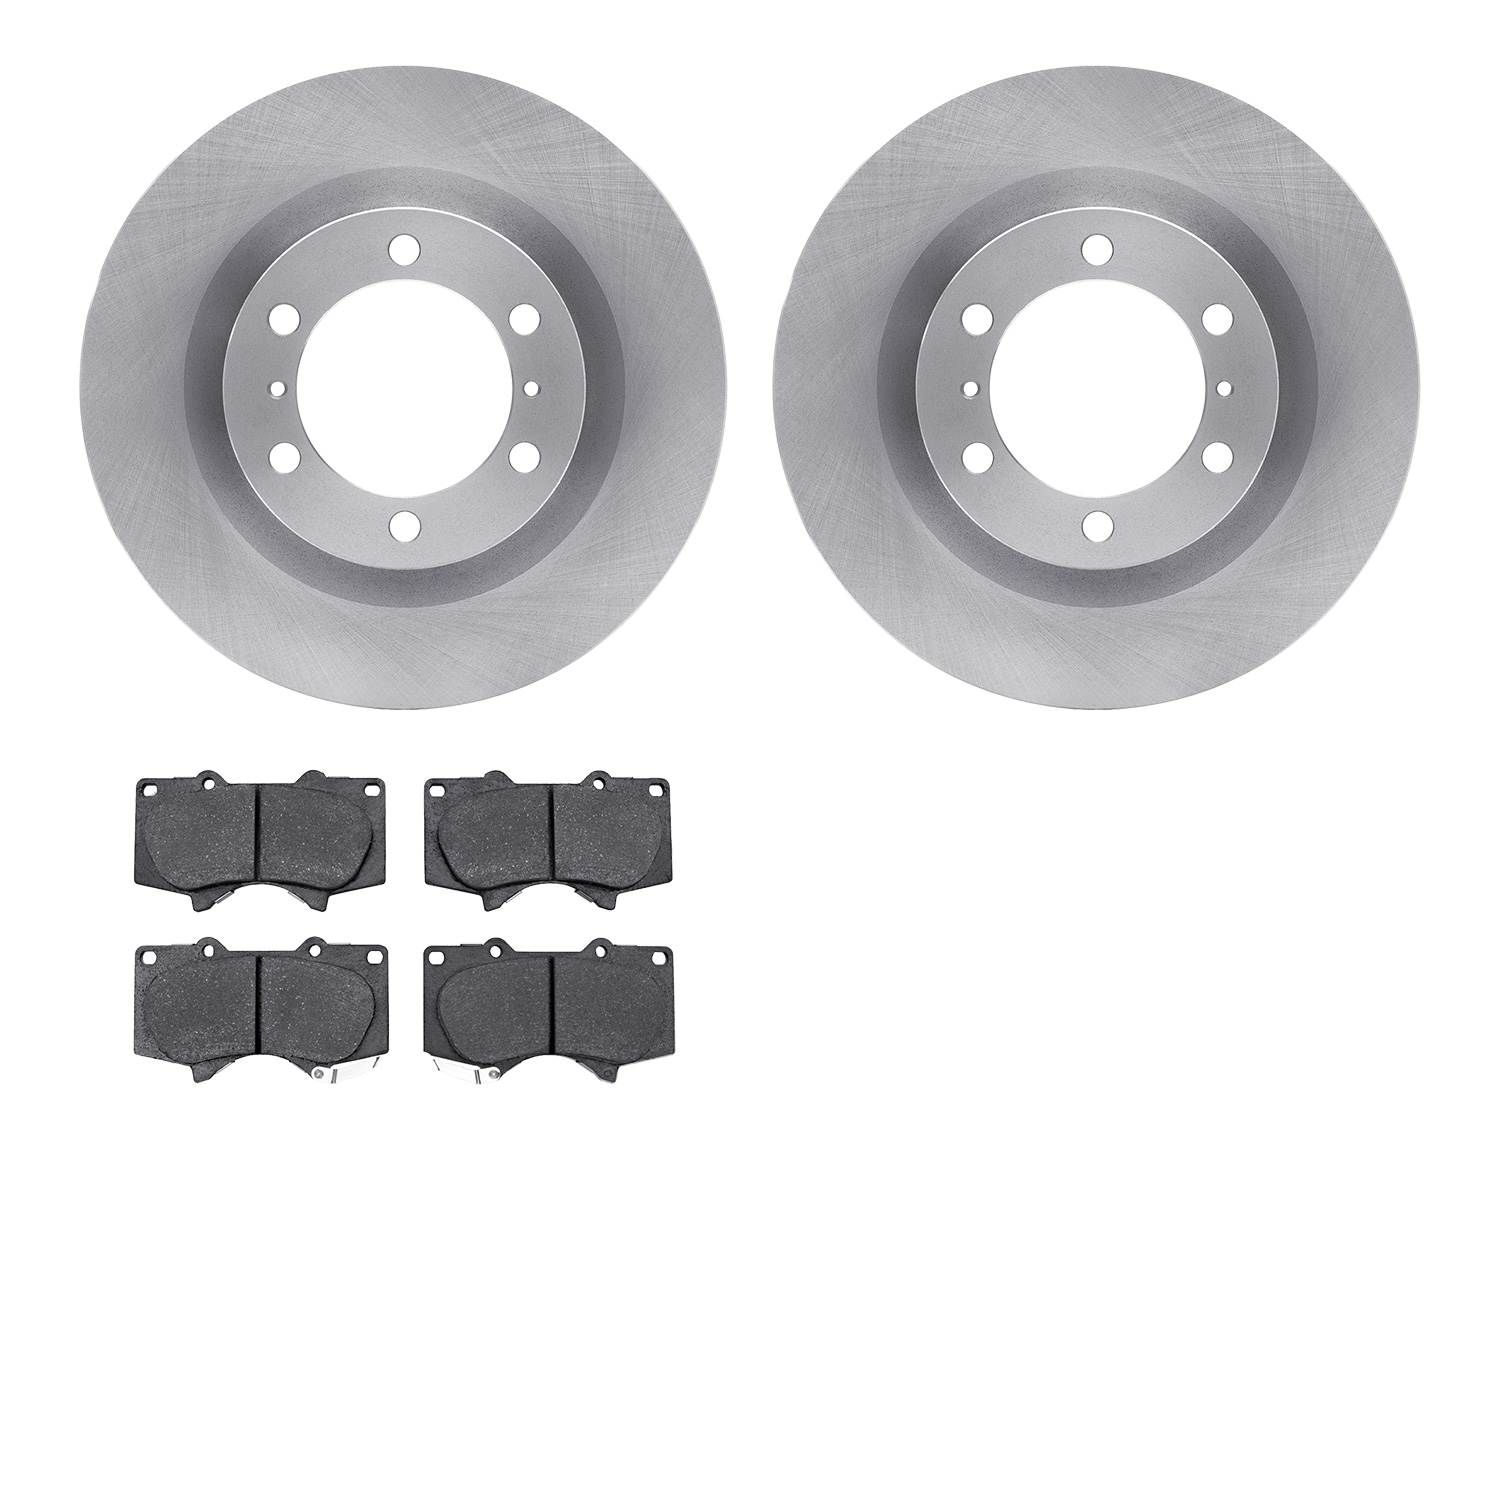 6402-76067 Brake Rotors with Ultimate-Duty Brake Pads, Fits Select Lexus/Toyota/Scion, Position: Front